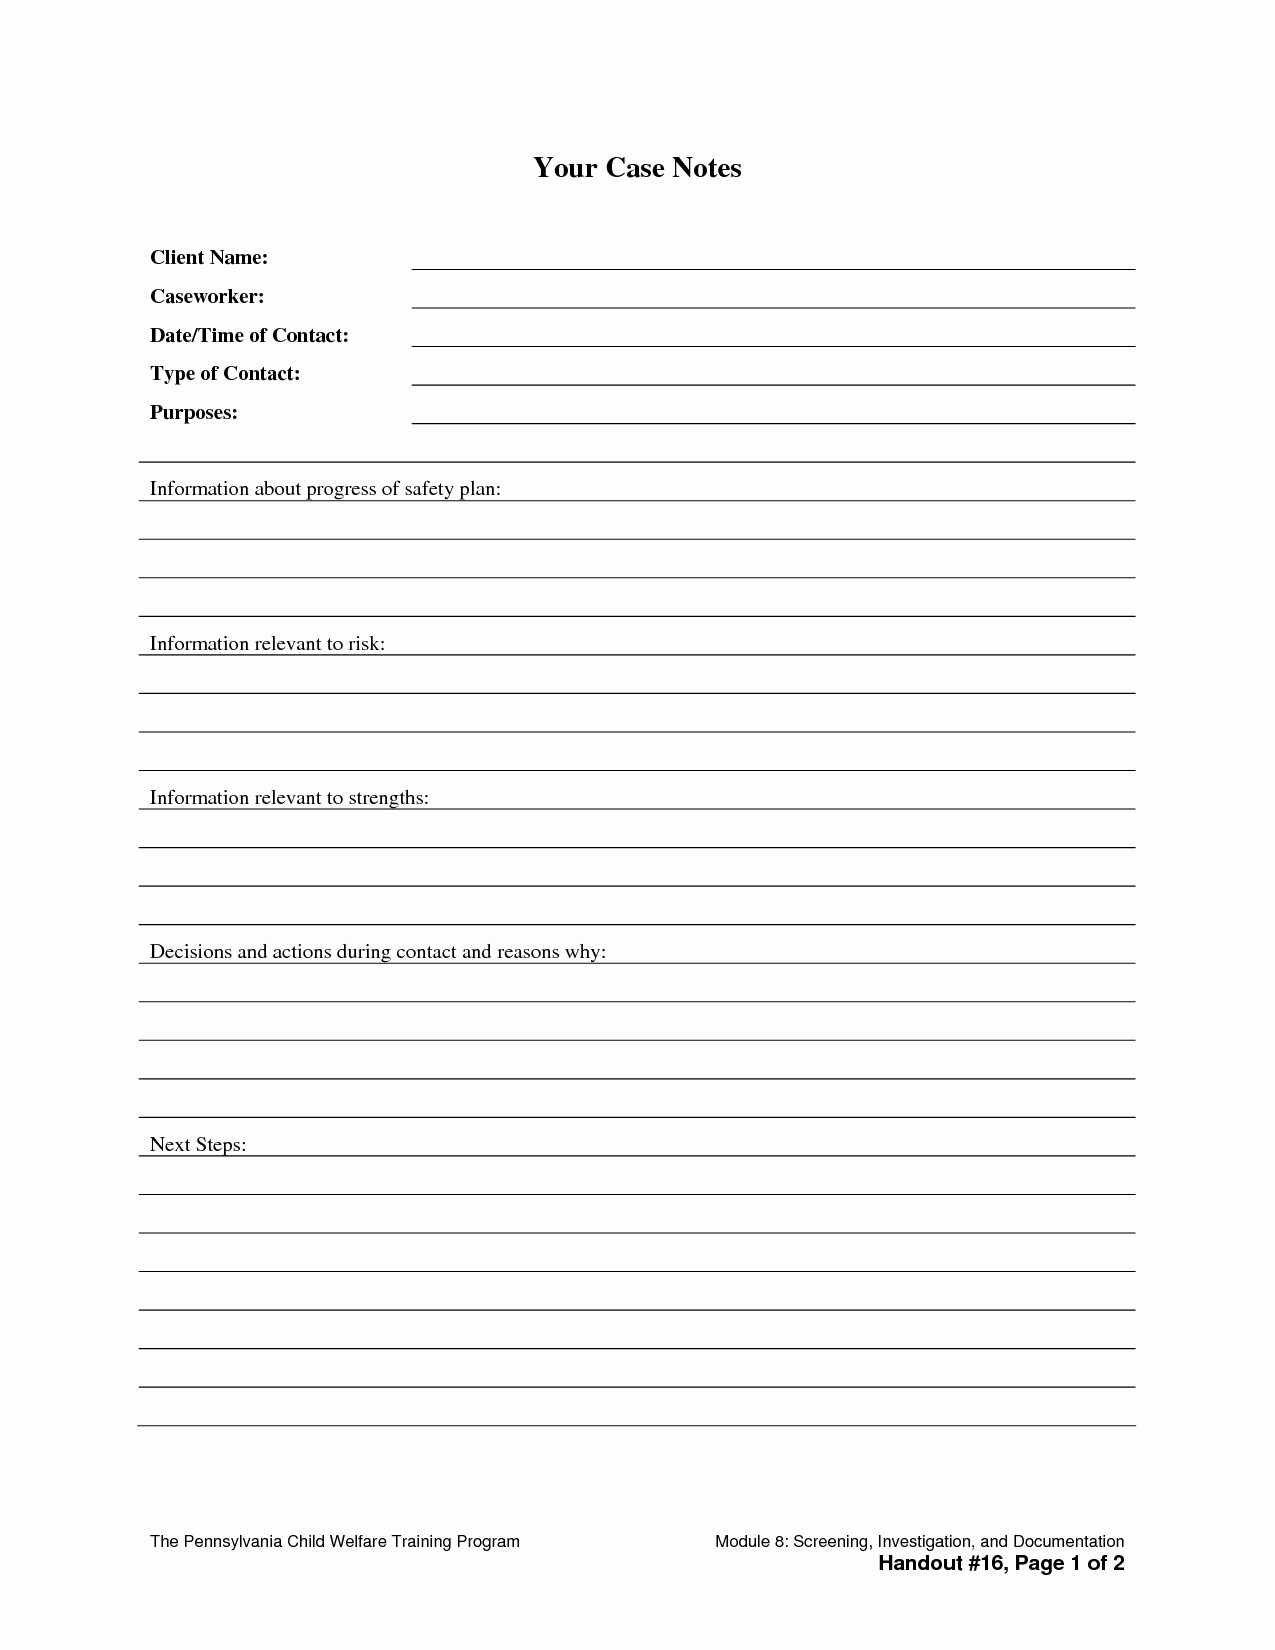 Case Management Notes Template Awesome Review Systems Template Nursing